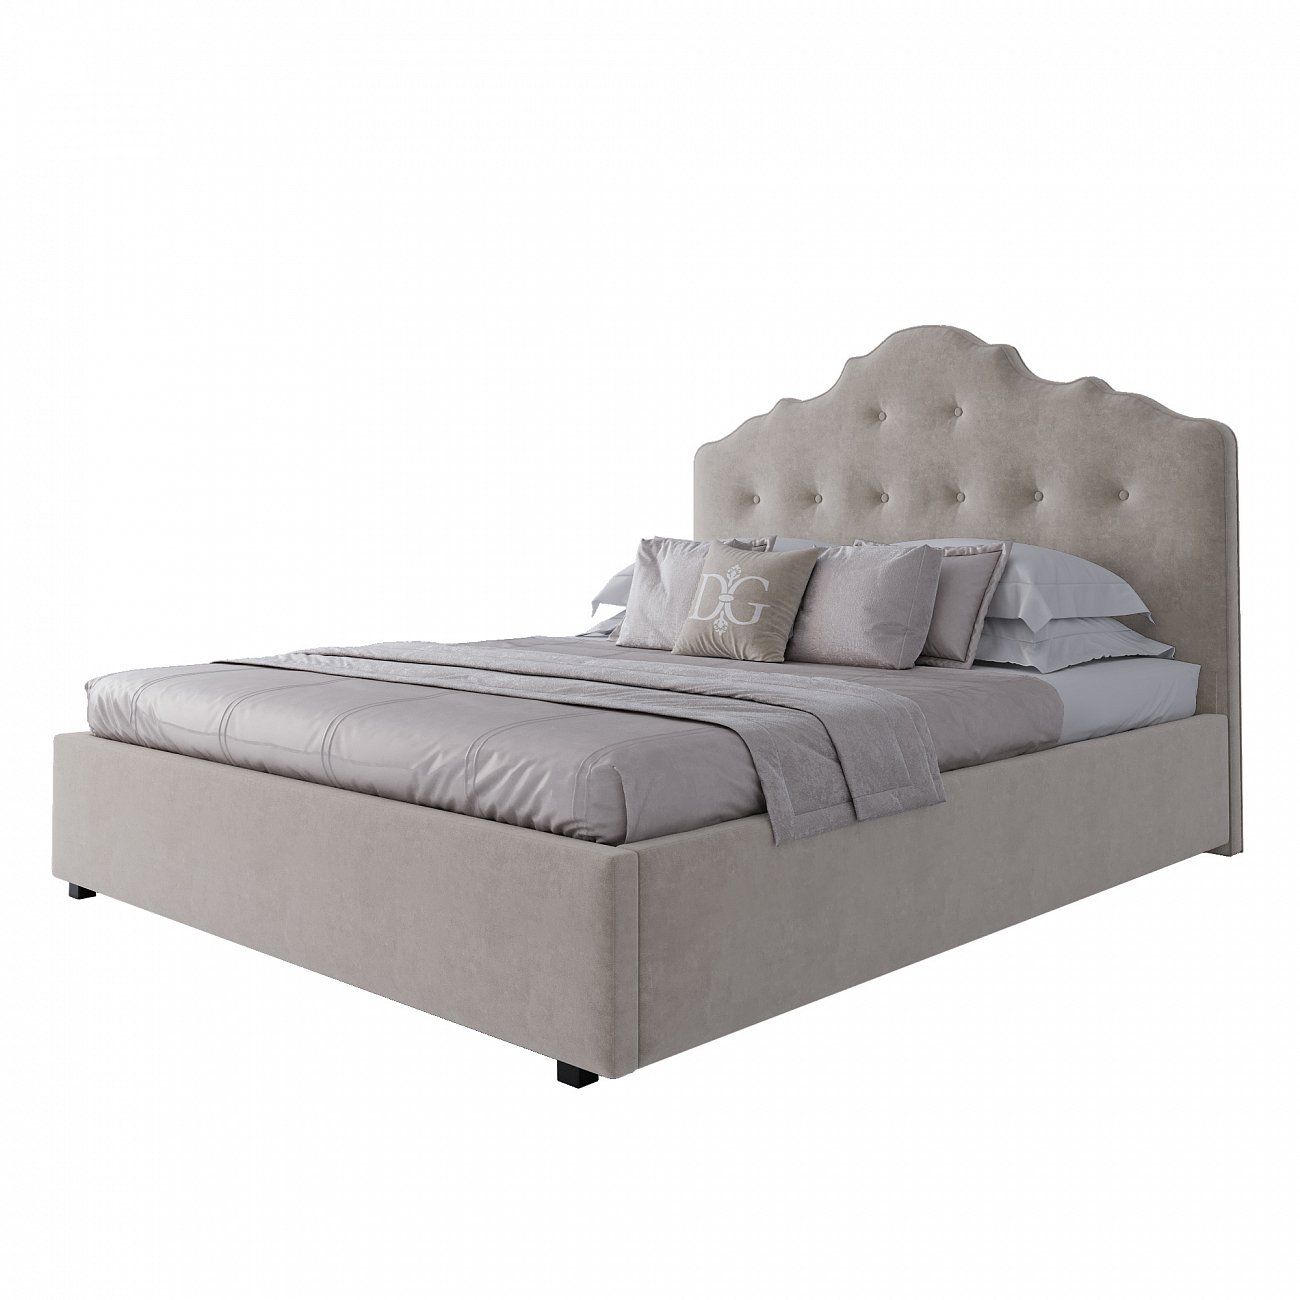 Double bed 160x200 light beige Palace